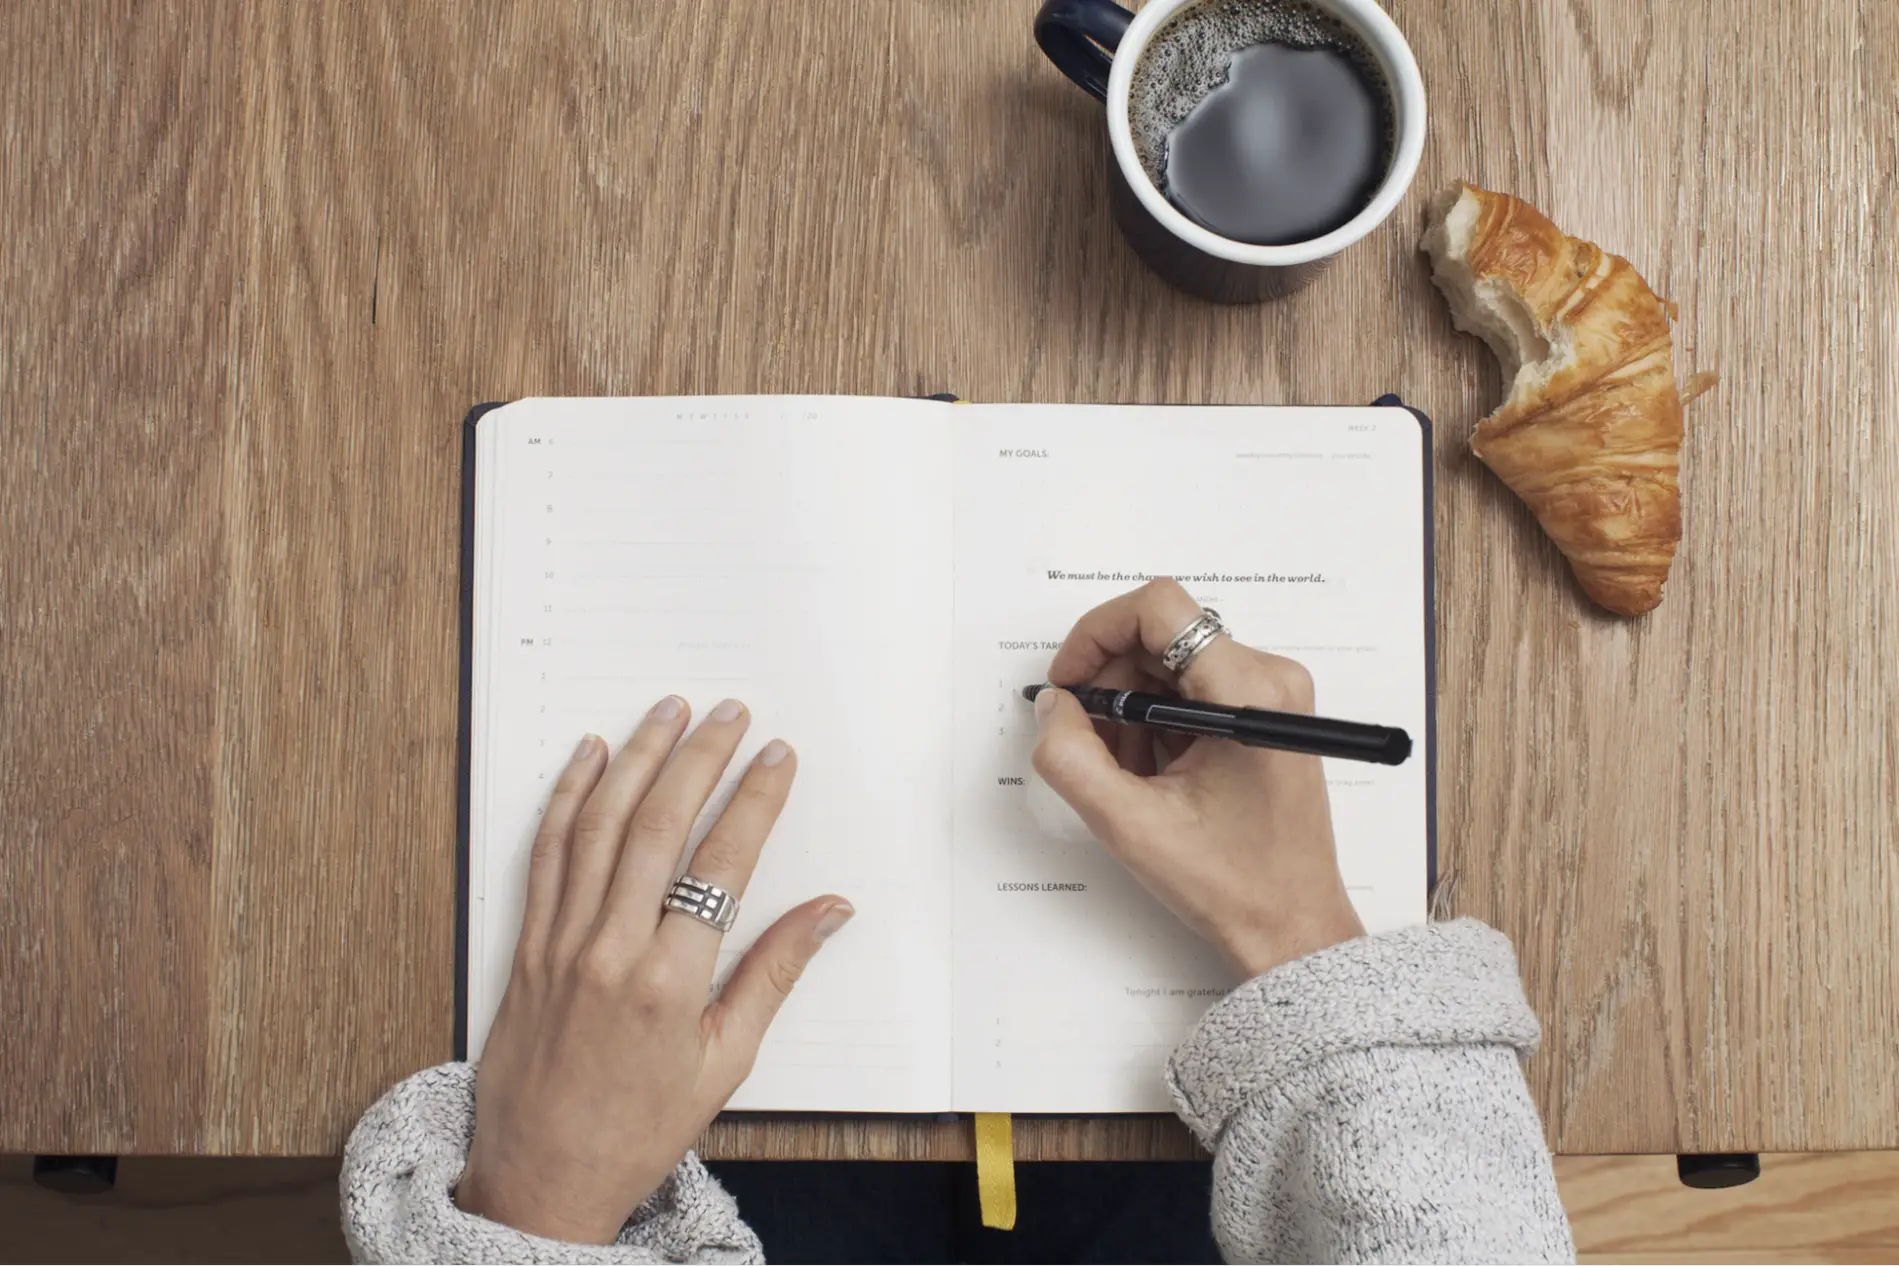 This is an image of a person writing notes with coffee and a pastry.